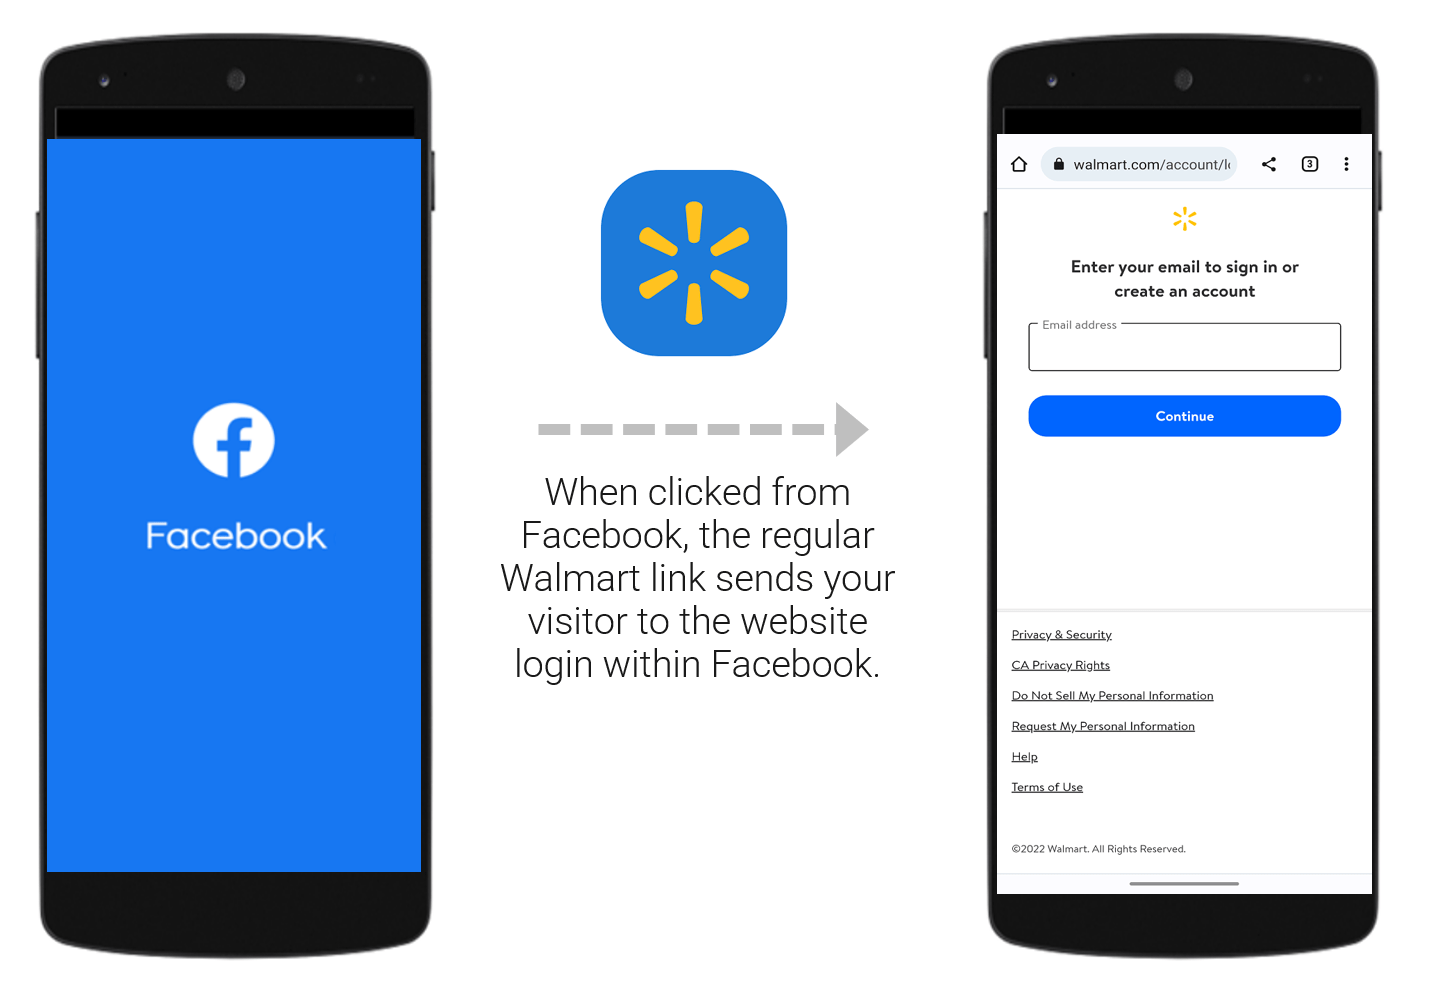 When clicked from Facebook, the regular Walmart ad link sends your visitor to the website login within the Facebook app